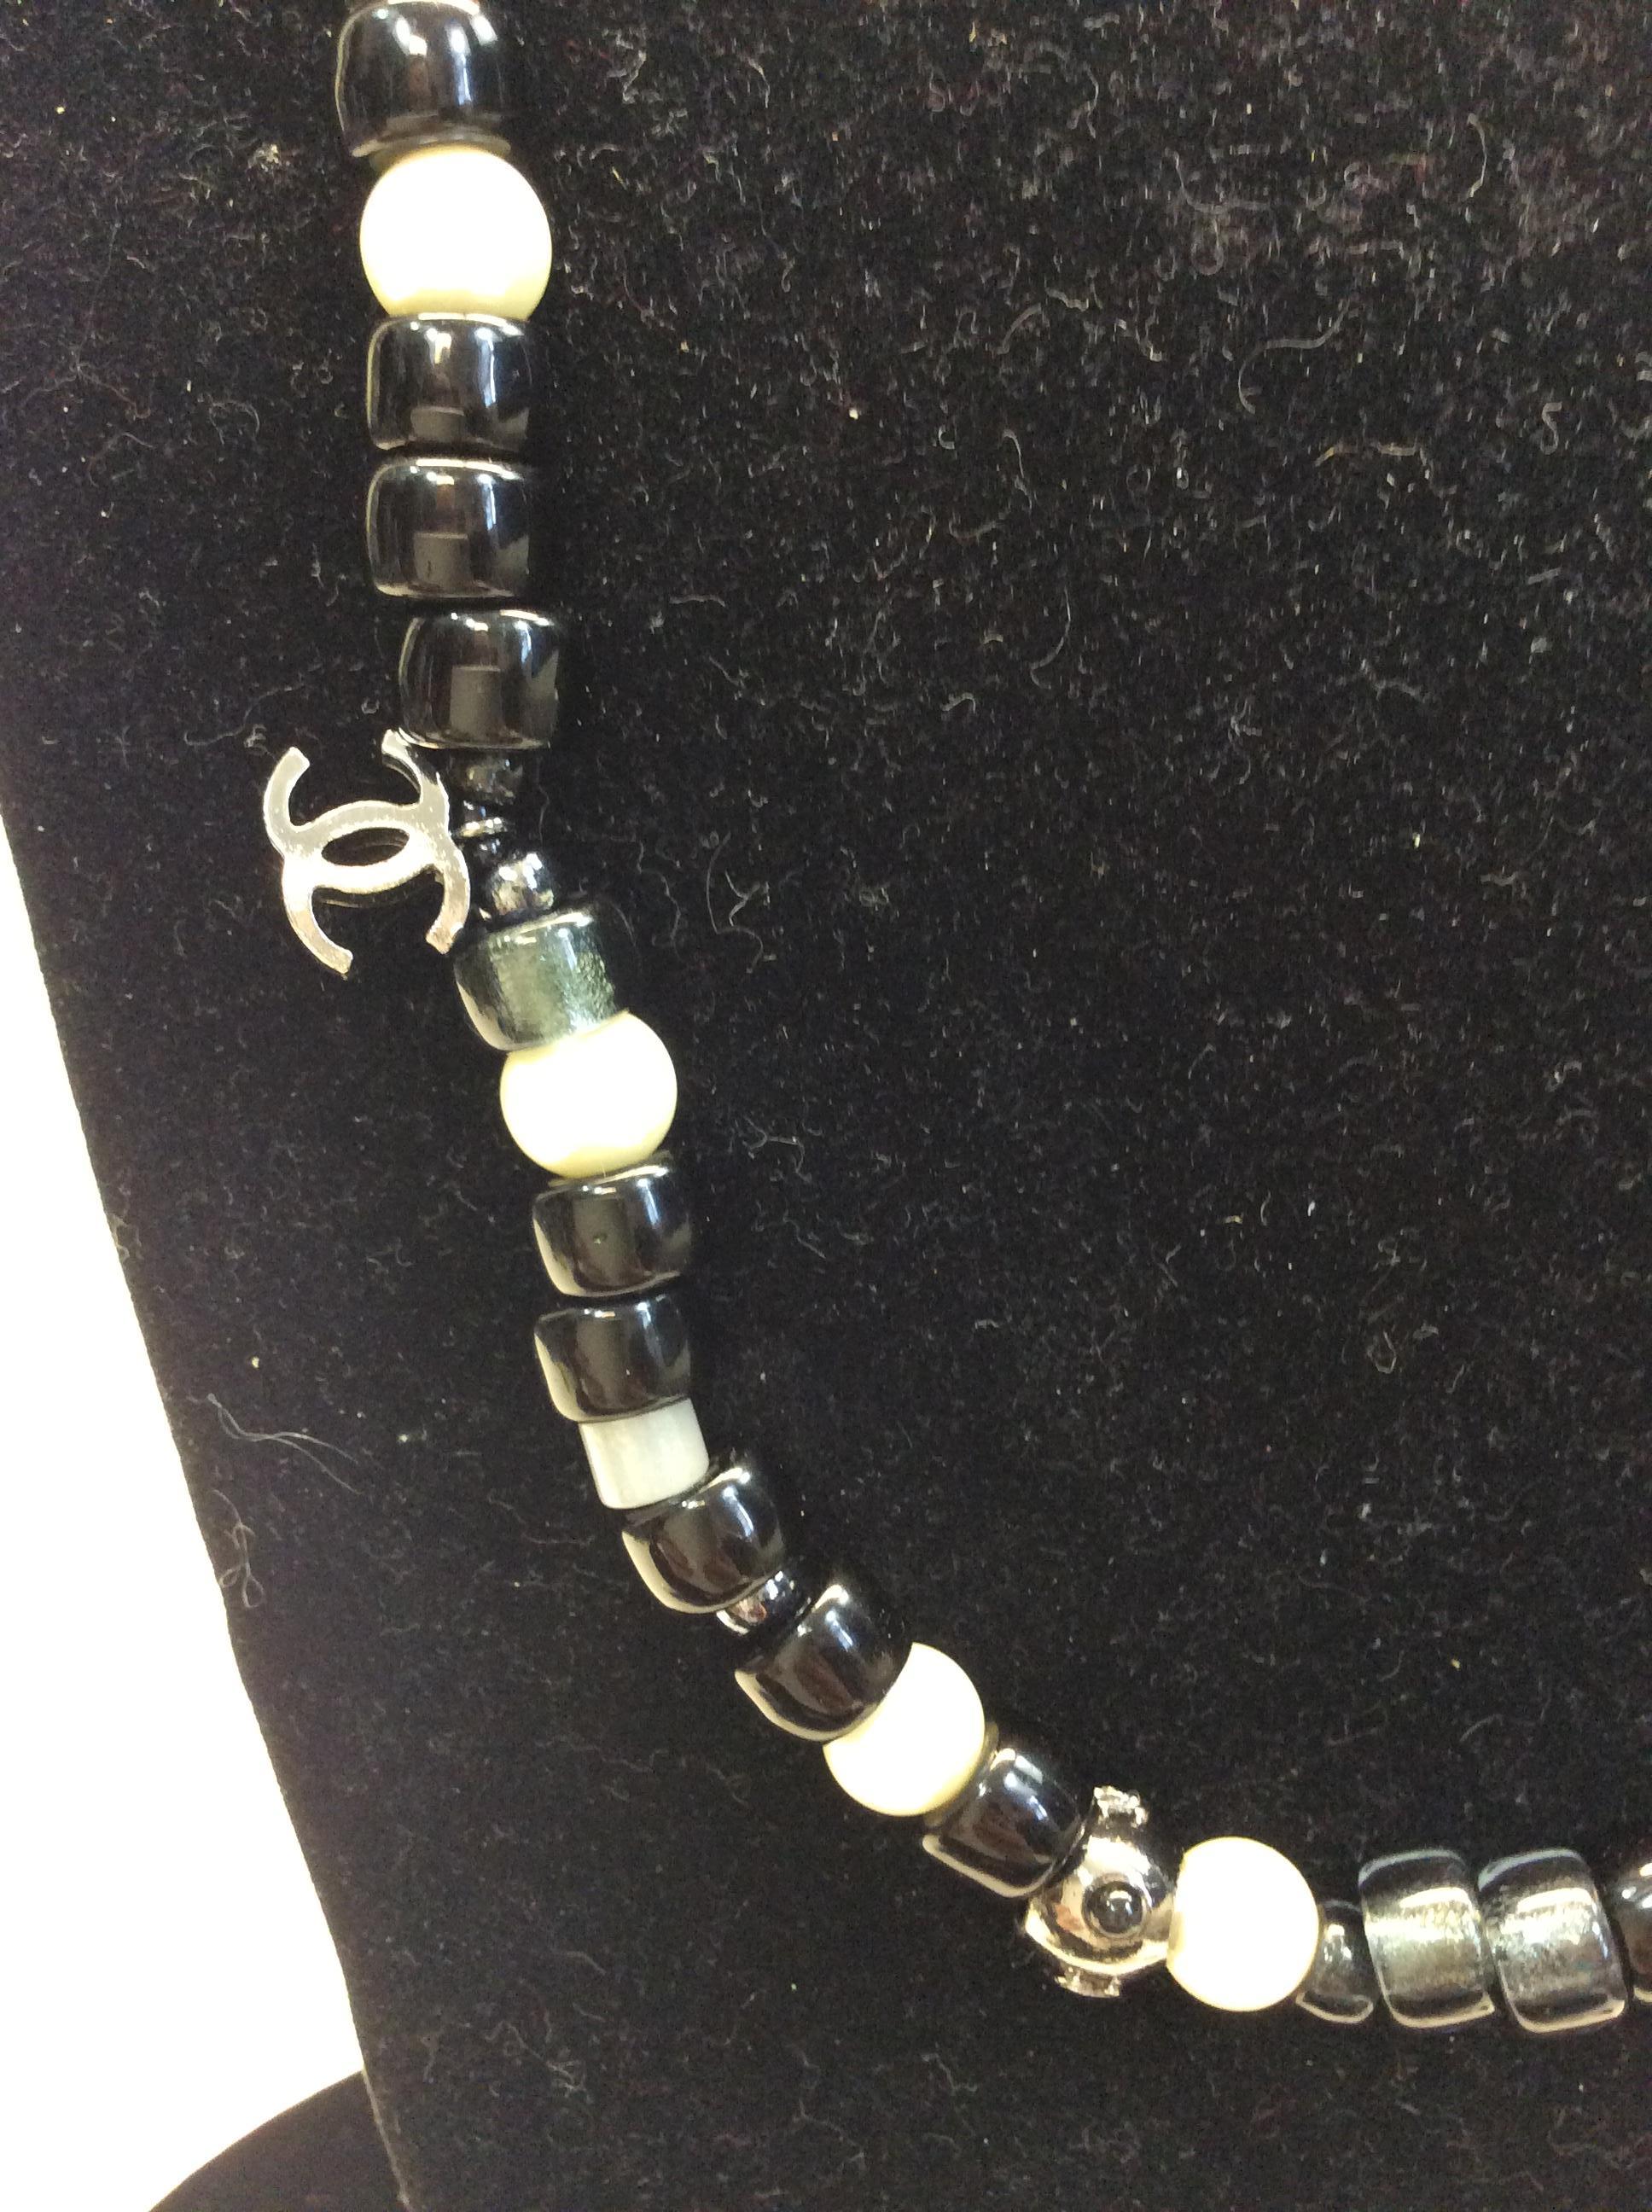 Chanel Black Beaded Necklace
$889
Made in France
14